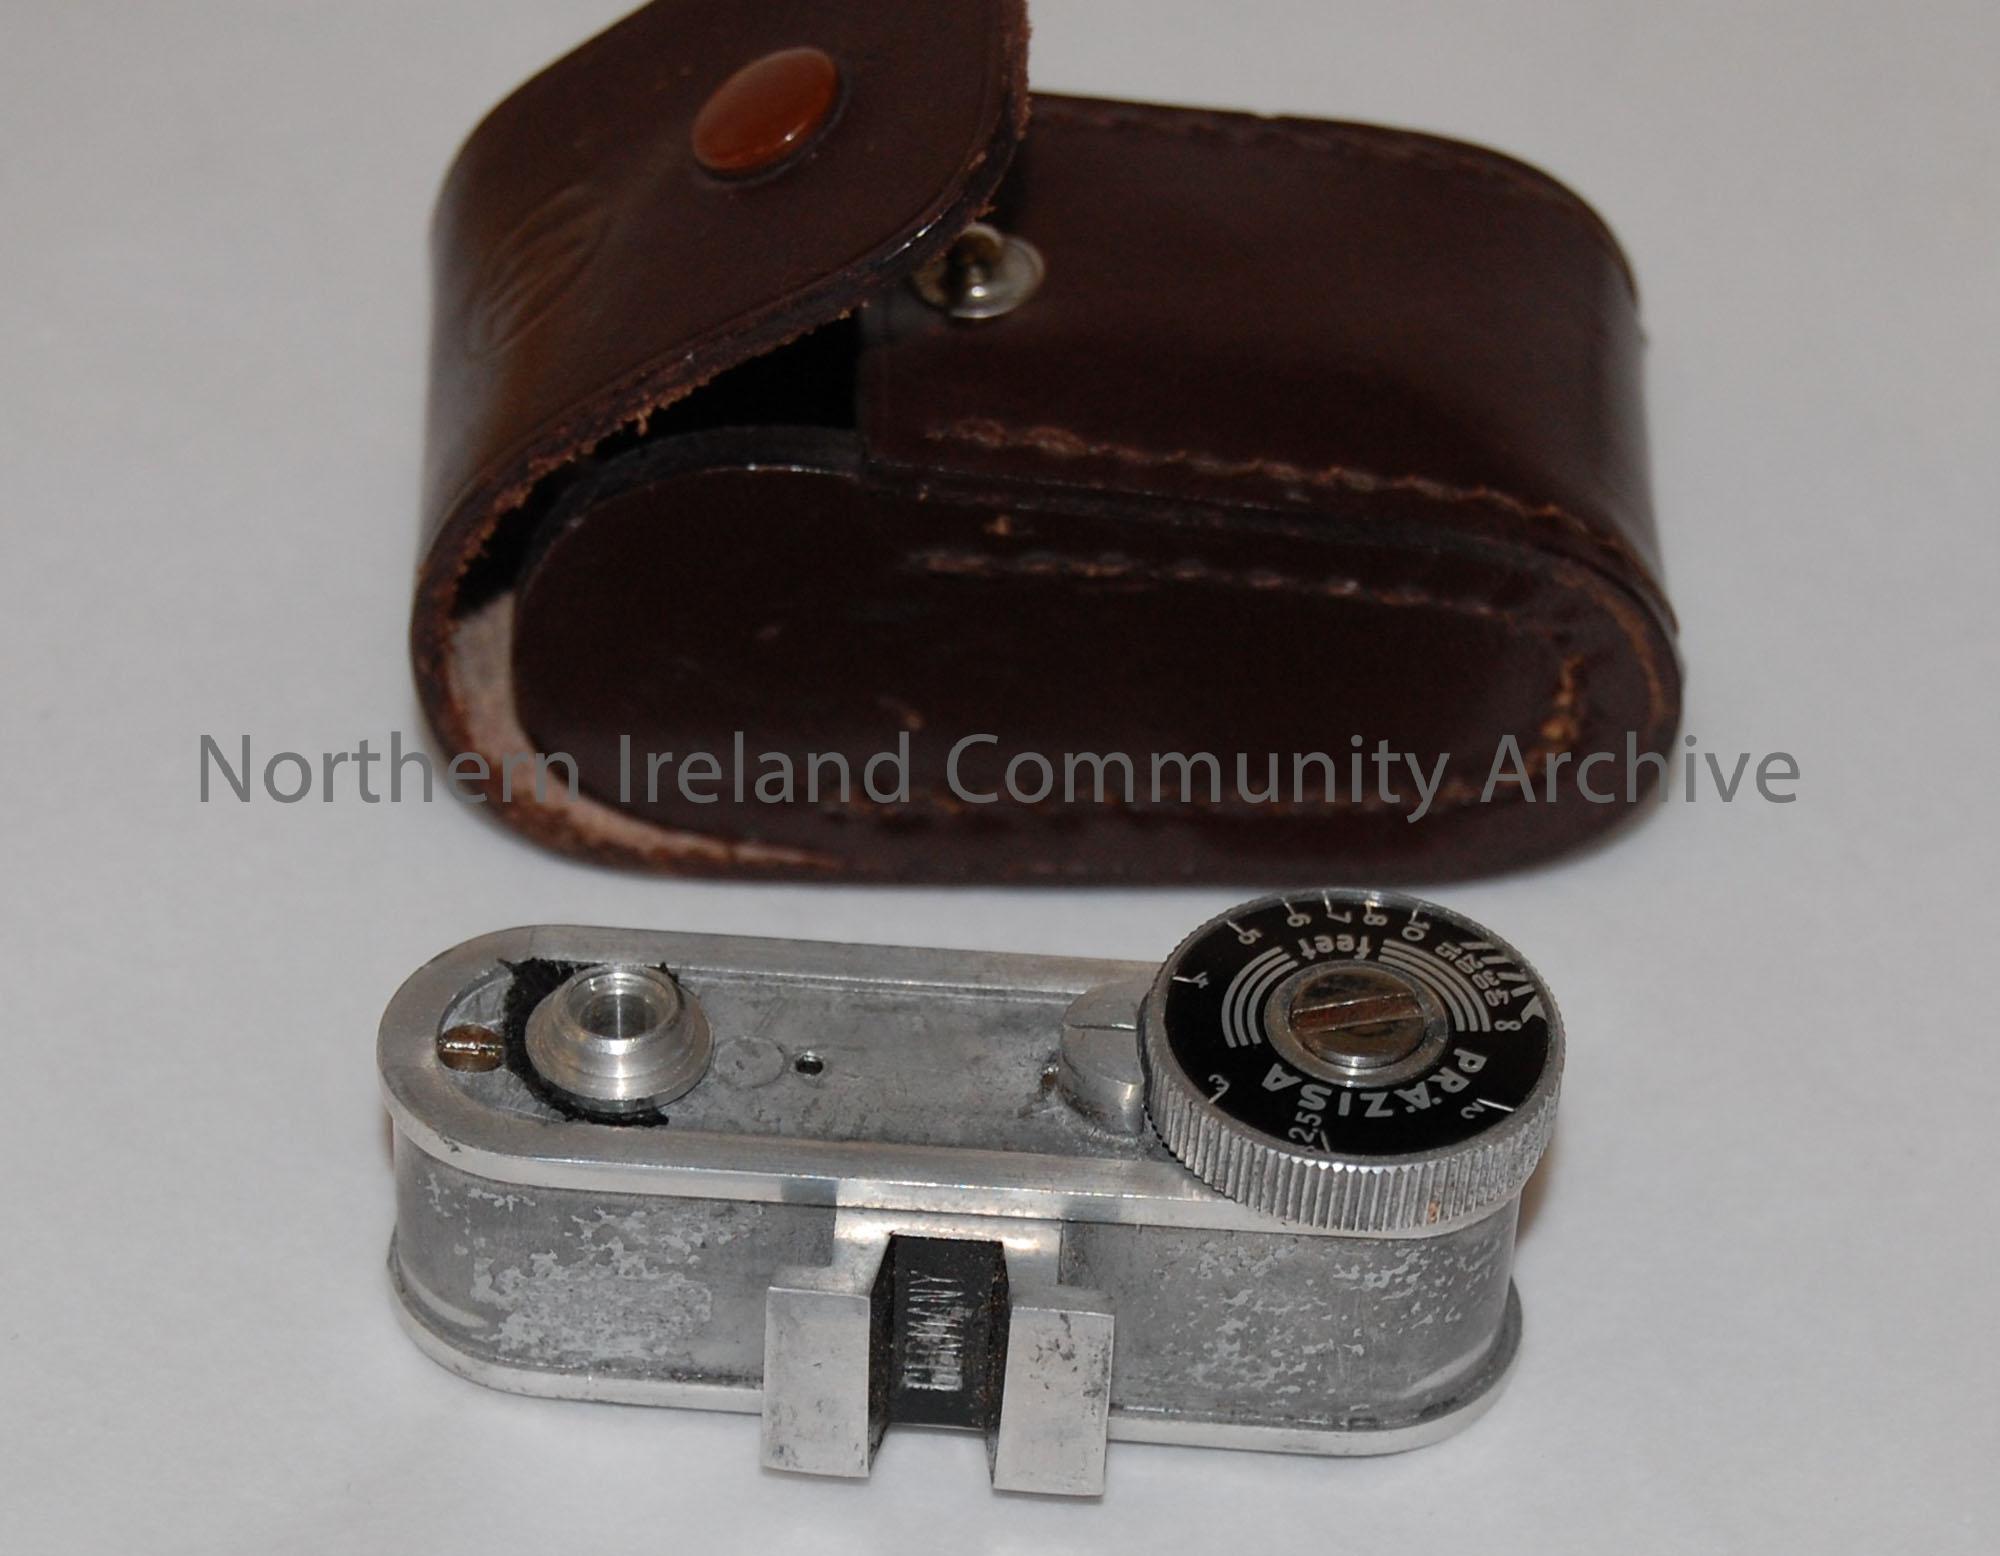 range finder, which slipped into the top of camera. Complete with brown leathercase